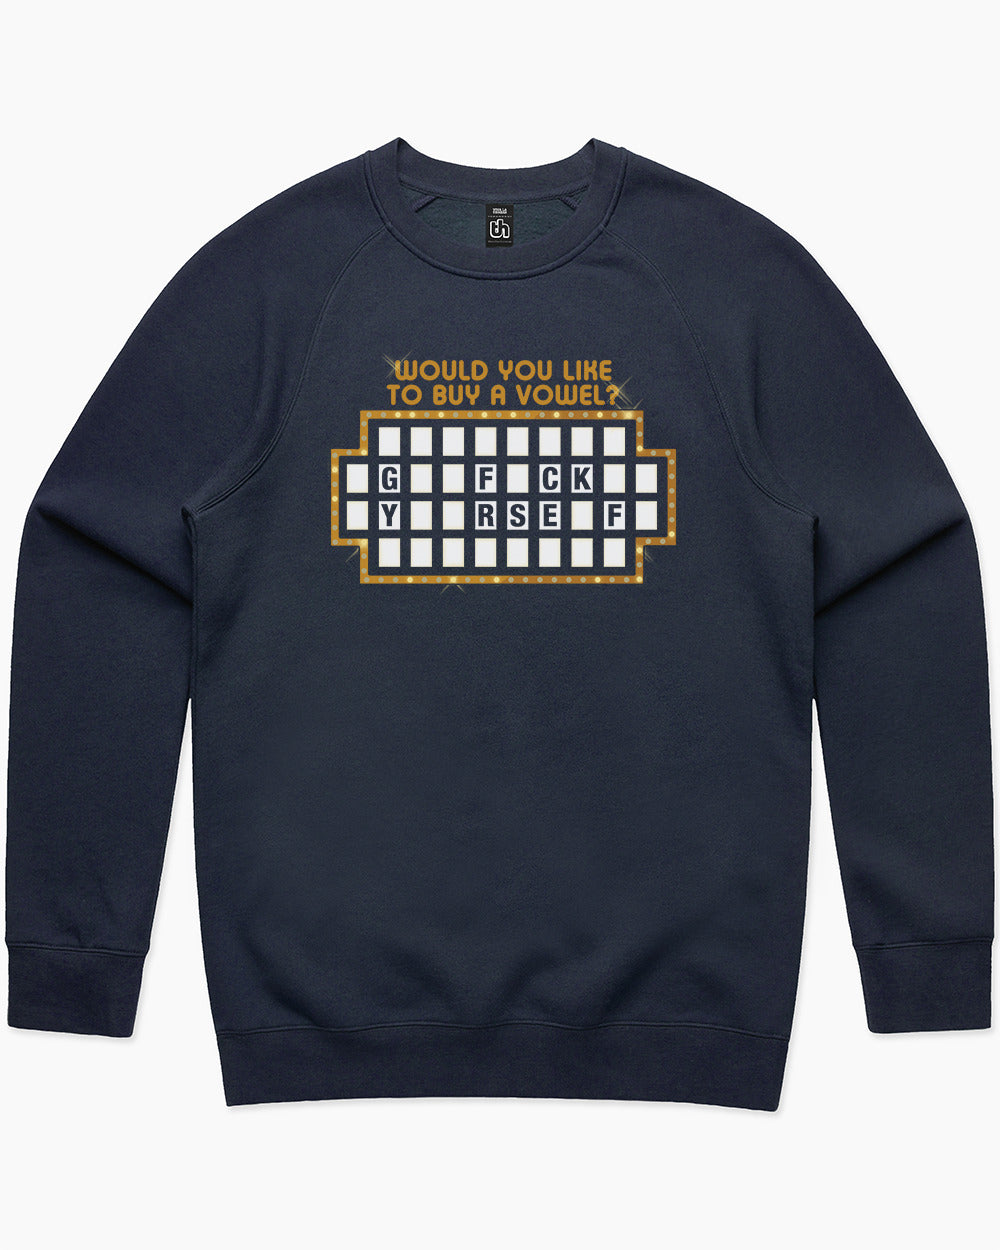 Would You Like To Buy A Vowel Or Would You To Buy A Vowel Sweater Europe Online #colour_navy